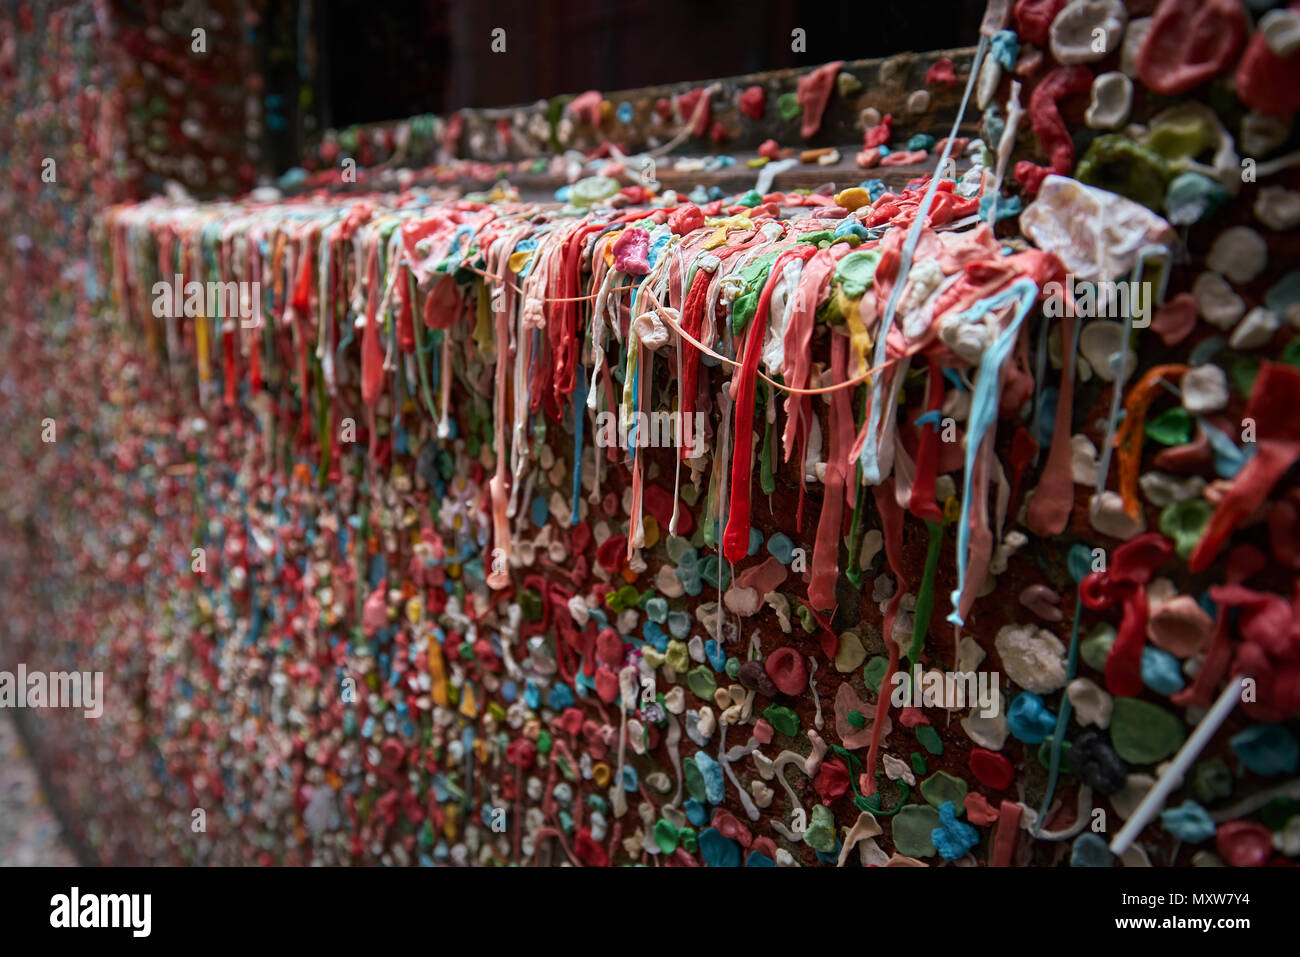 Seattle Gum Wall, Pike Place Market  The gum wall in Pike Place Market, downtown Seattle, Washington. Stock Photo